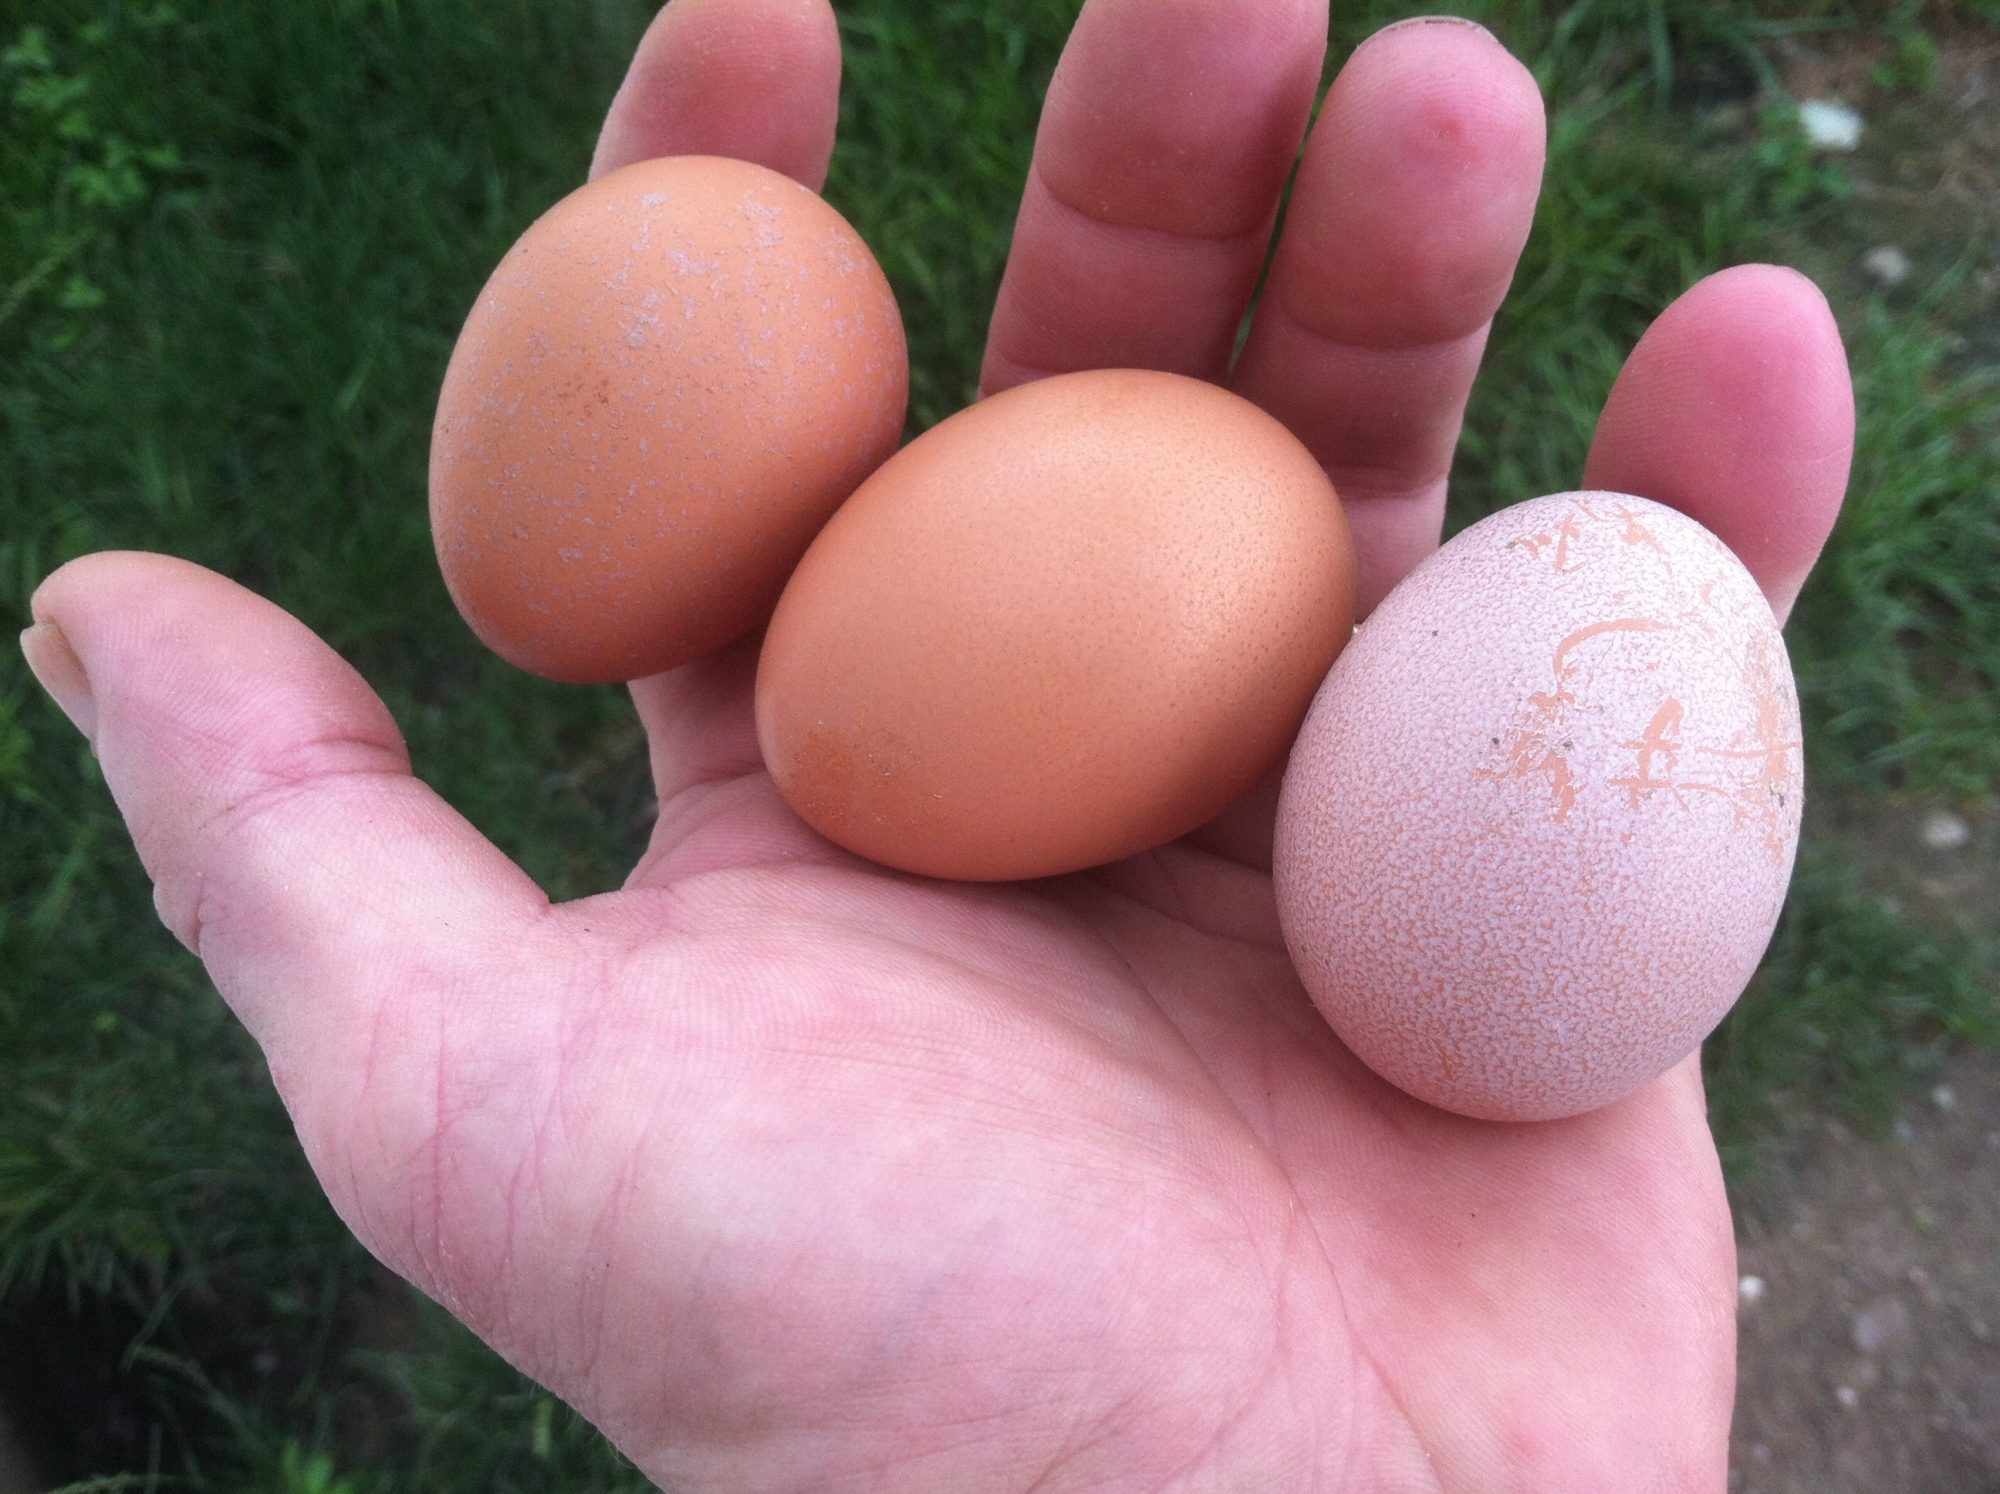 First eggs from our chickens laid on 7/18/2013